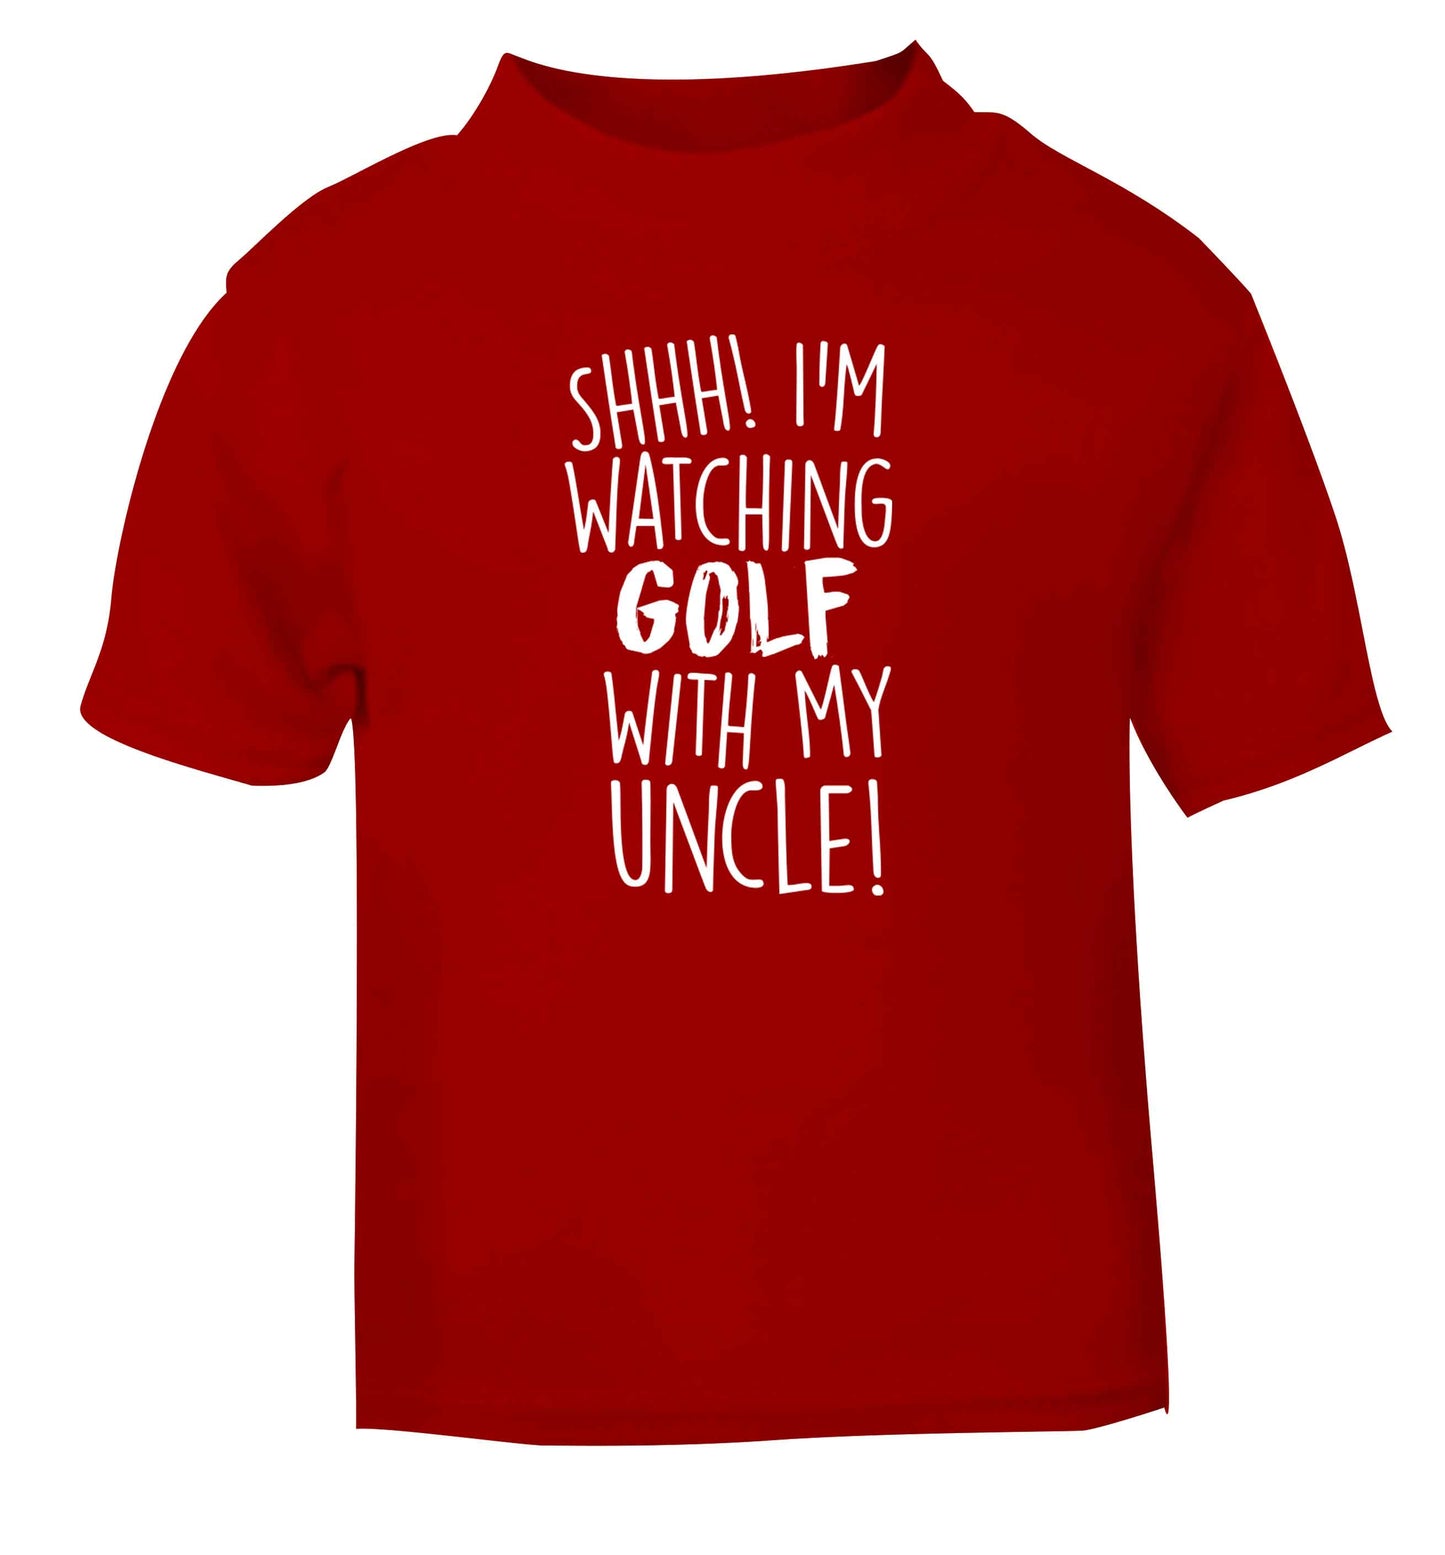 Shh I'm watching golf with my uncle red Baby Toddler Tshirt 2 Years